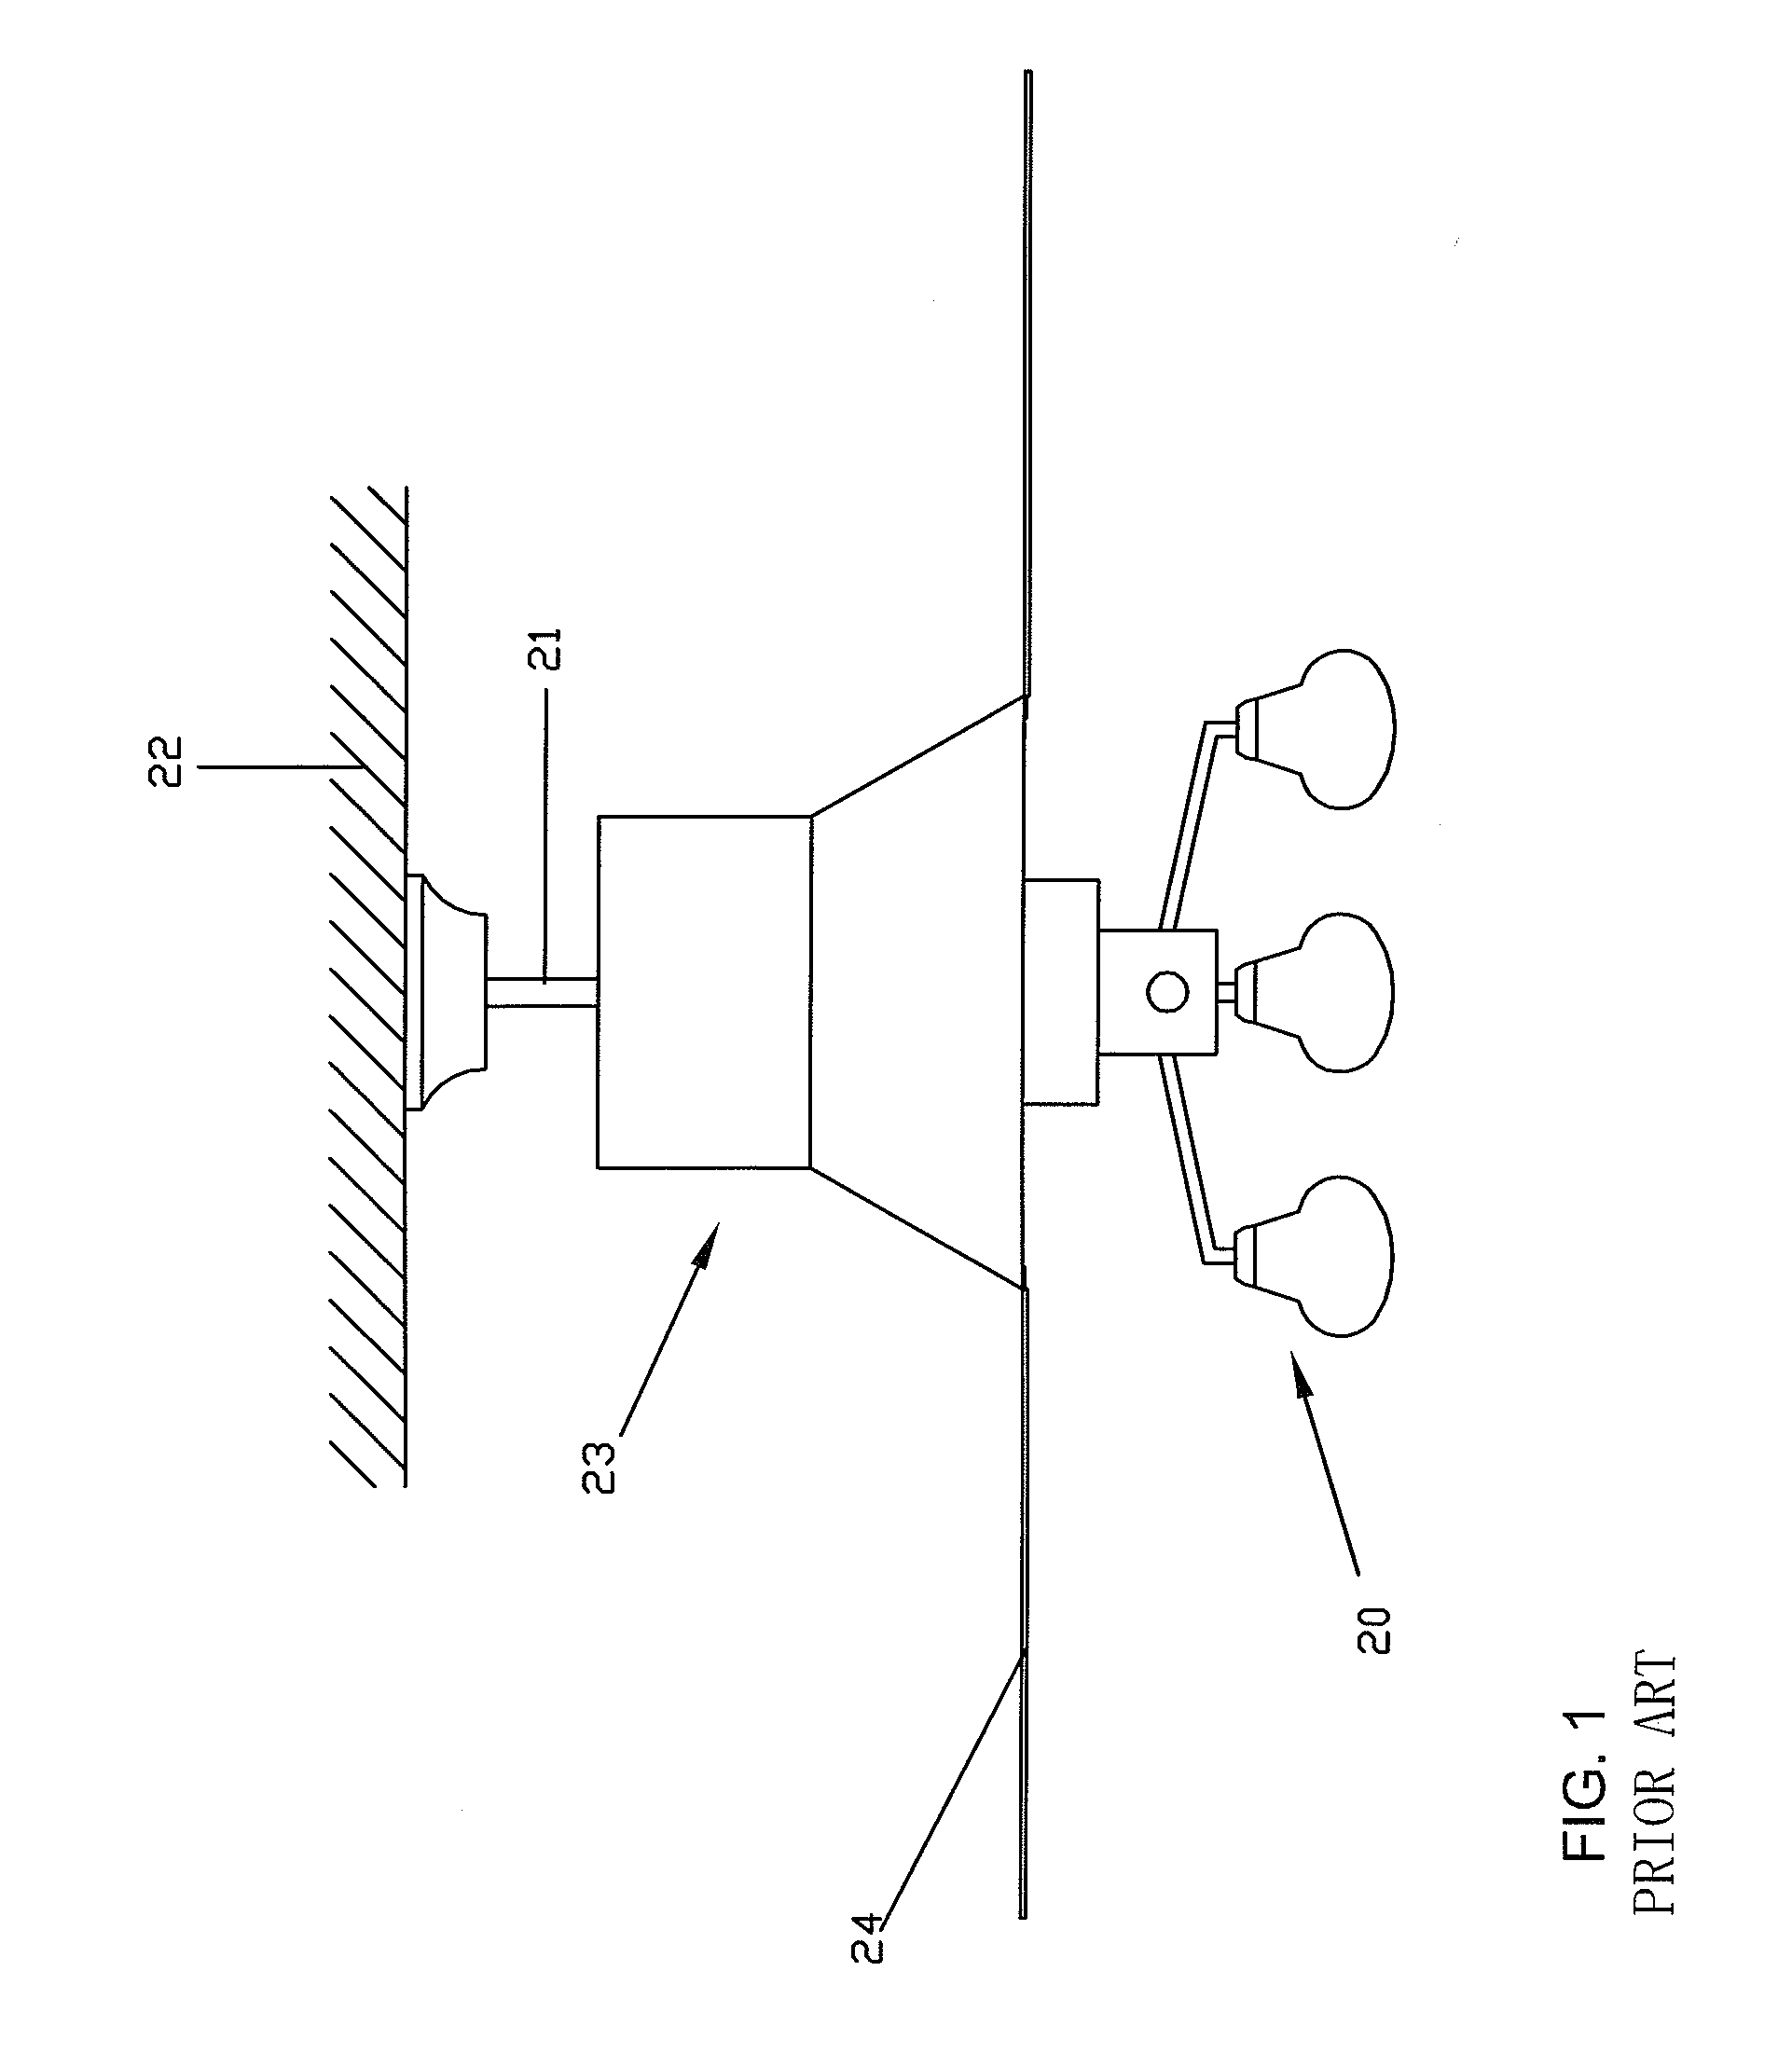 Pendent Lamp Having An Air Conditioning Function